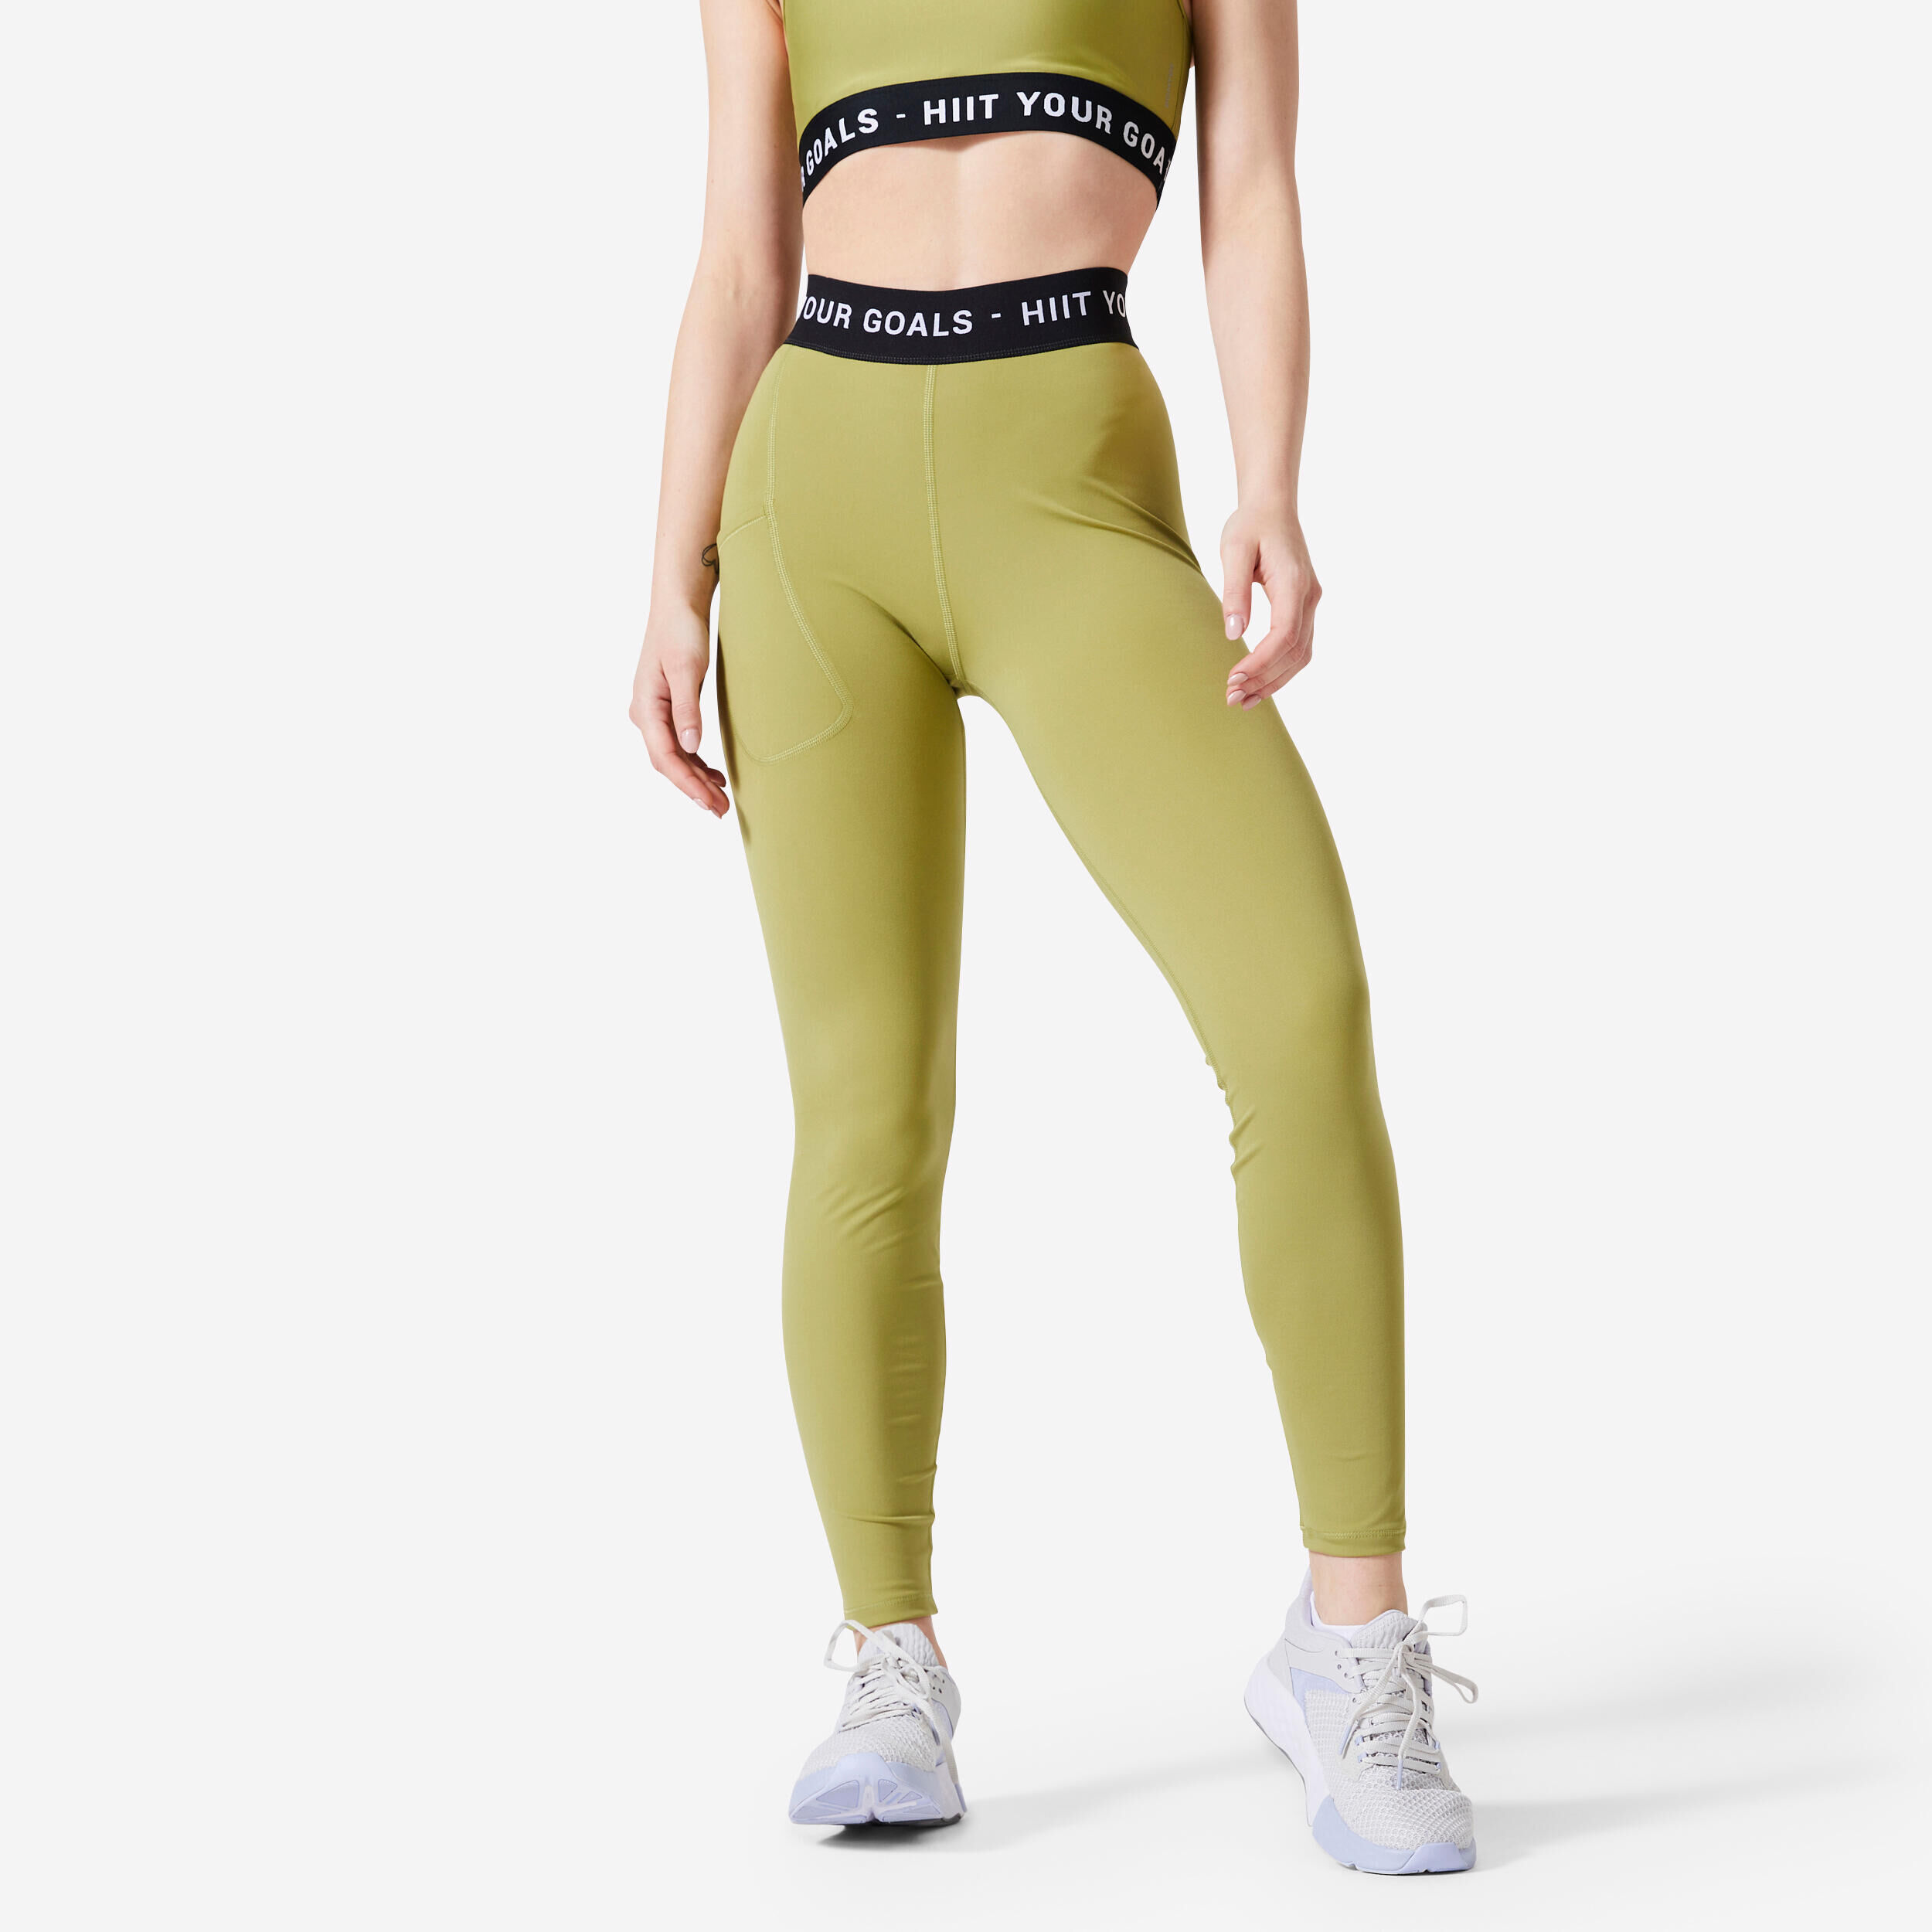 DOMYOS Women's Cardio Training Comfortable and Soft Long Leggings - Olive Green